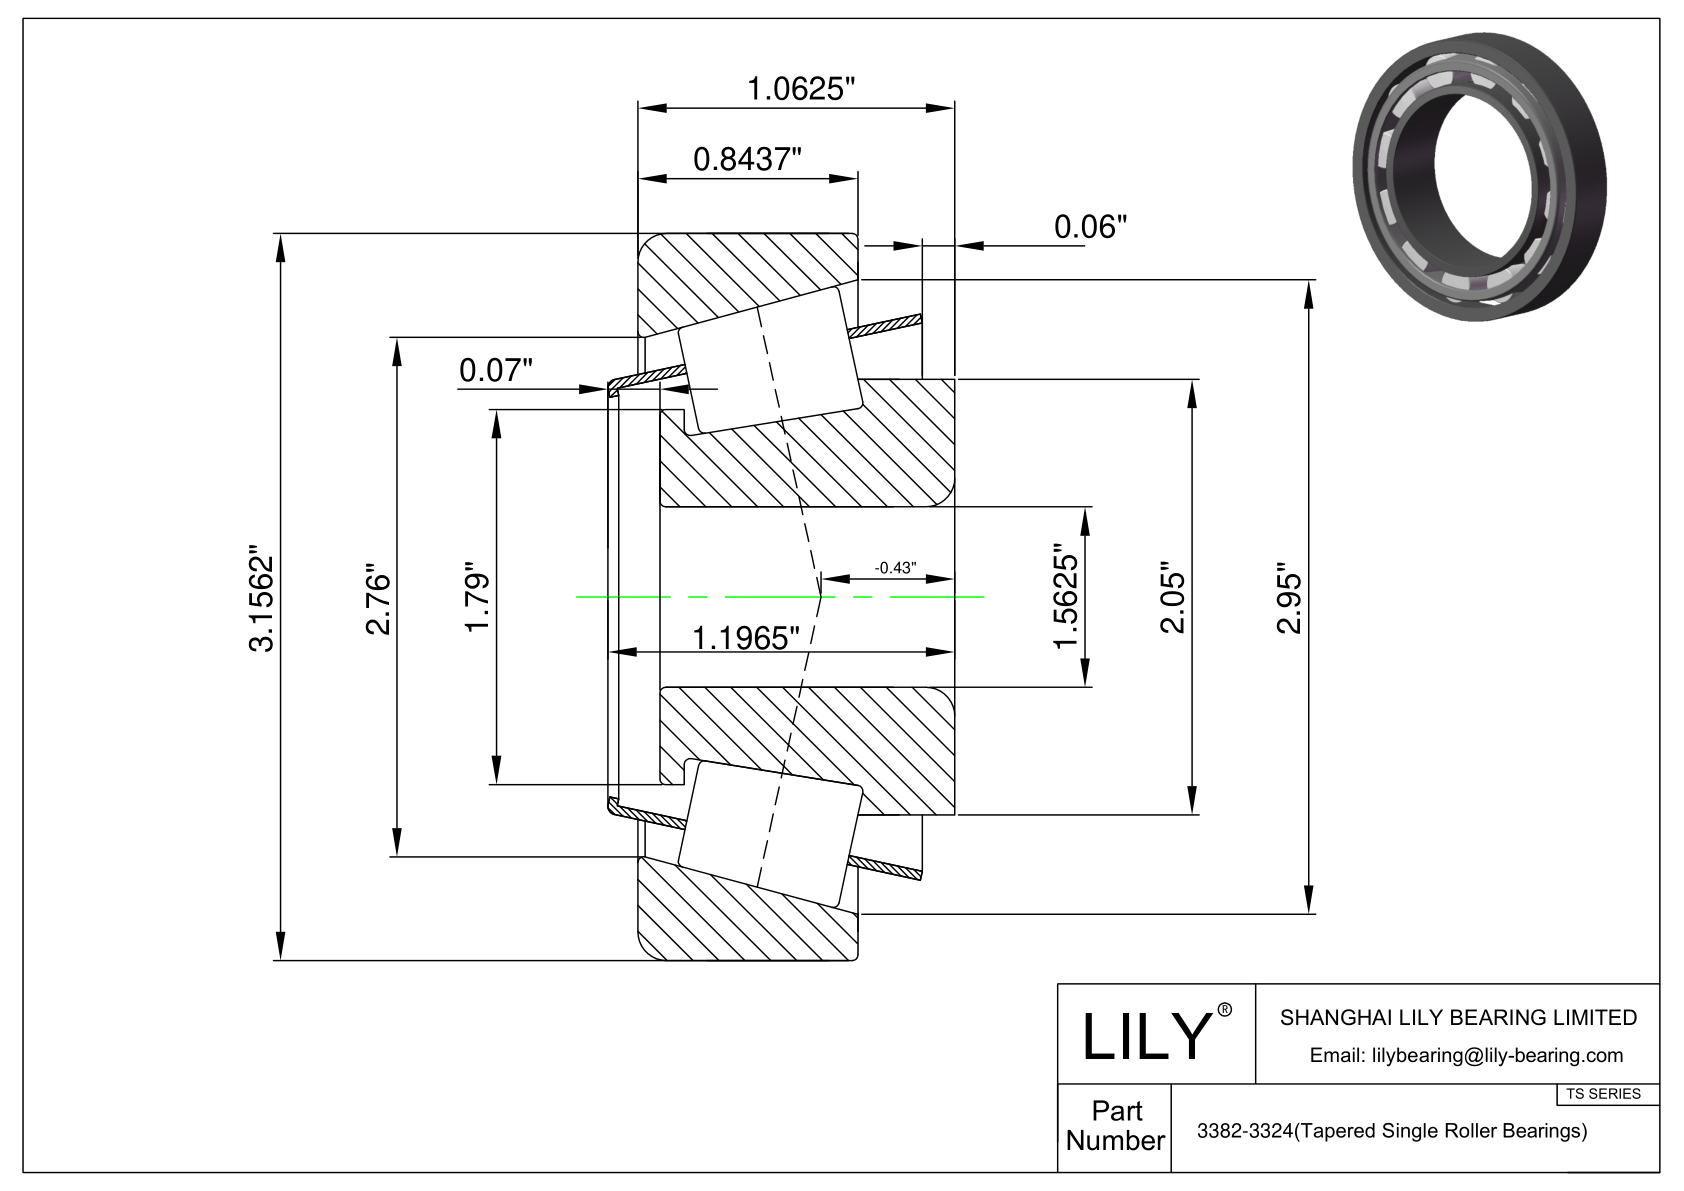 3382-3324 TS (Tapered Single Roller Bearings) (Imperial) cad drawing